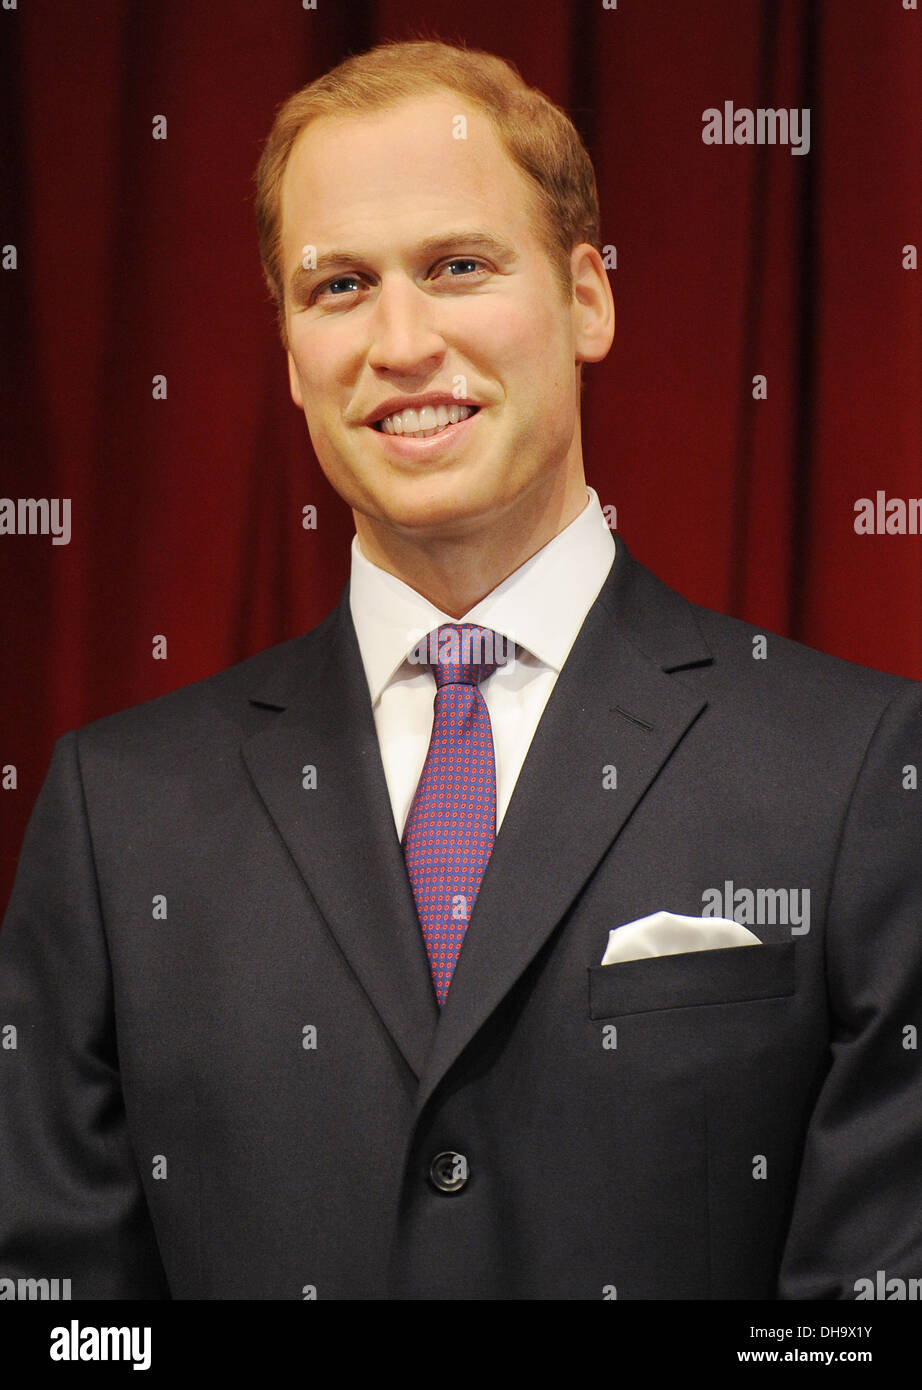 Madame Tussauds London reveals the new wax figure of Prince William London, England - 04.04.12 Stock Photo